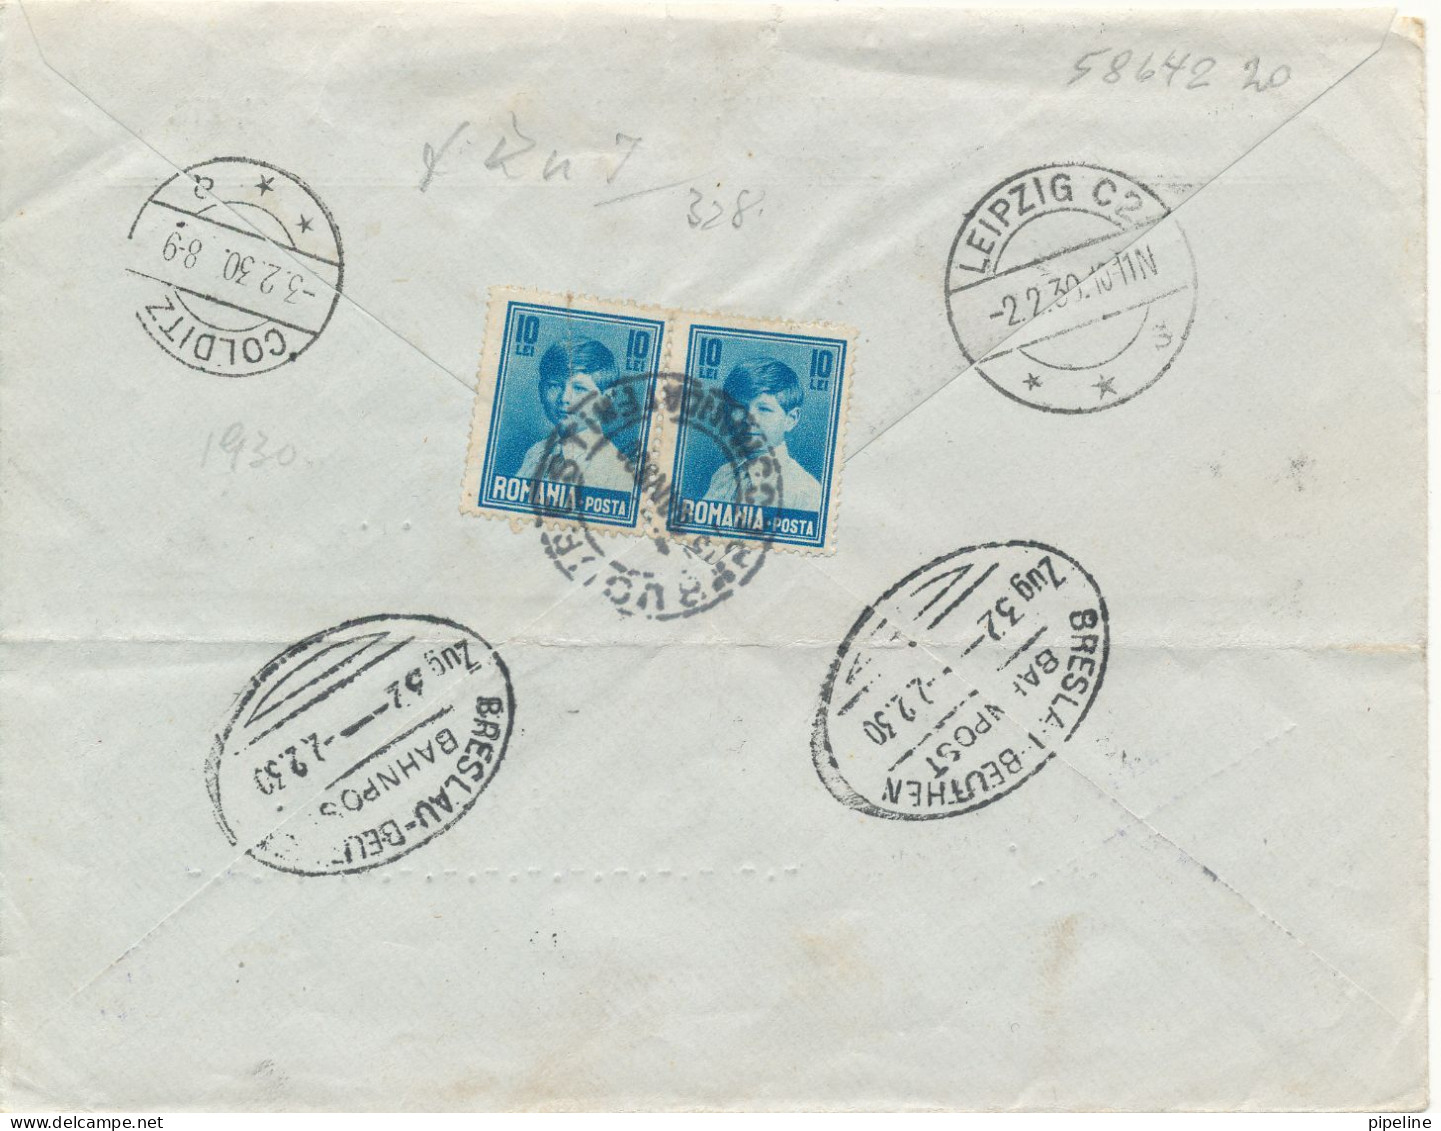 Romania Registered Cover Sent To Germany 31-1-1930 On The Backside Bahnpost Breslau - Beuthen Zug 32 2-2-1930 - Storia Postale